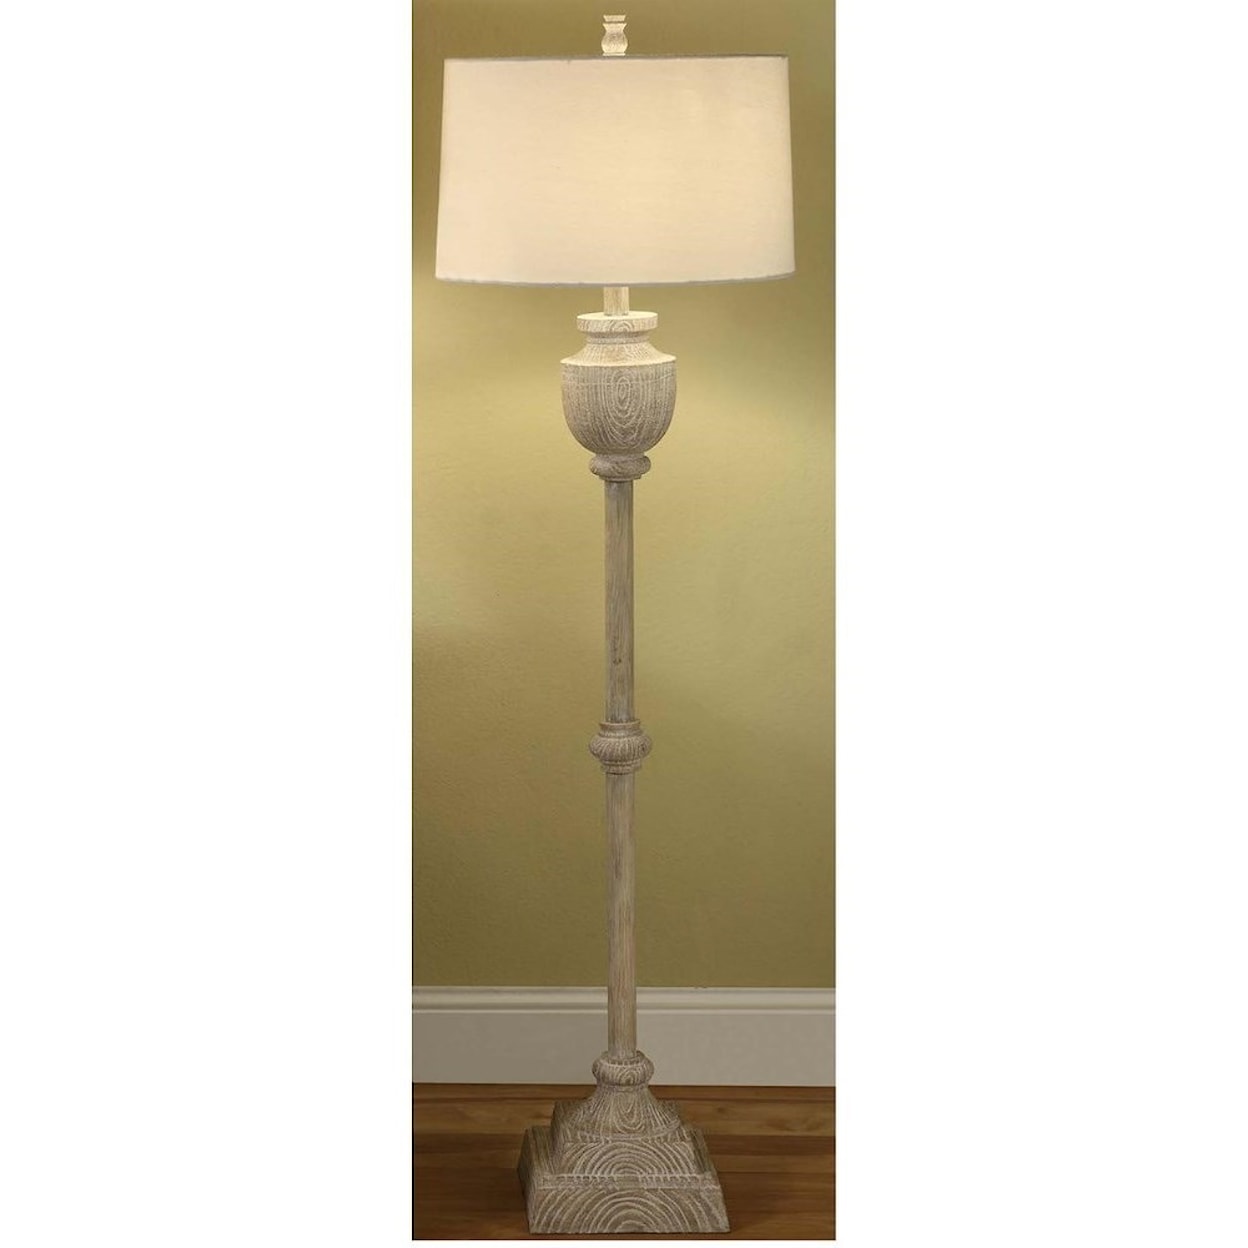 Crestview Collection Lighting Avalon Carved Wood Floor Lamp